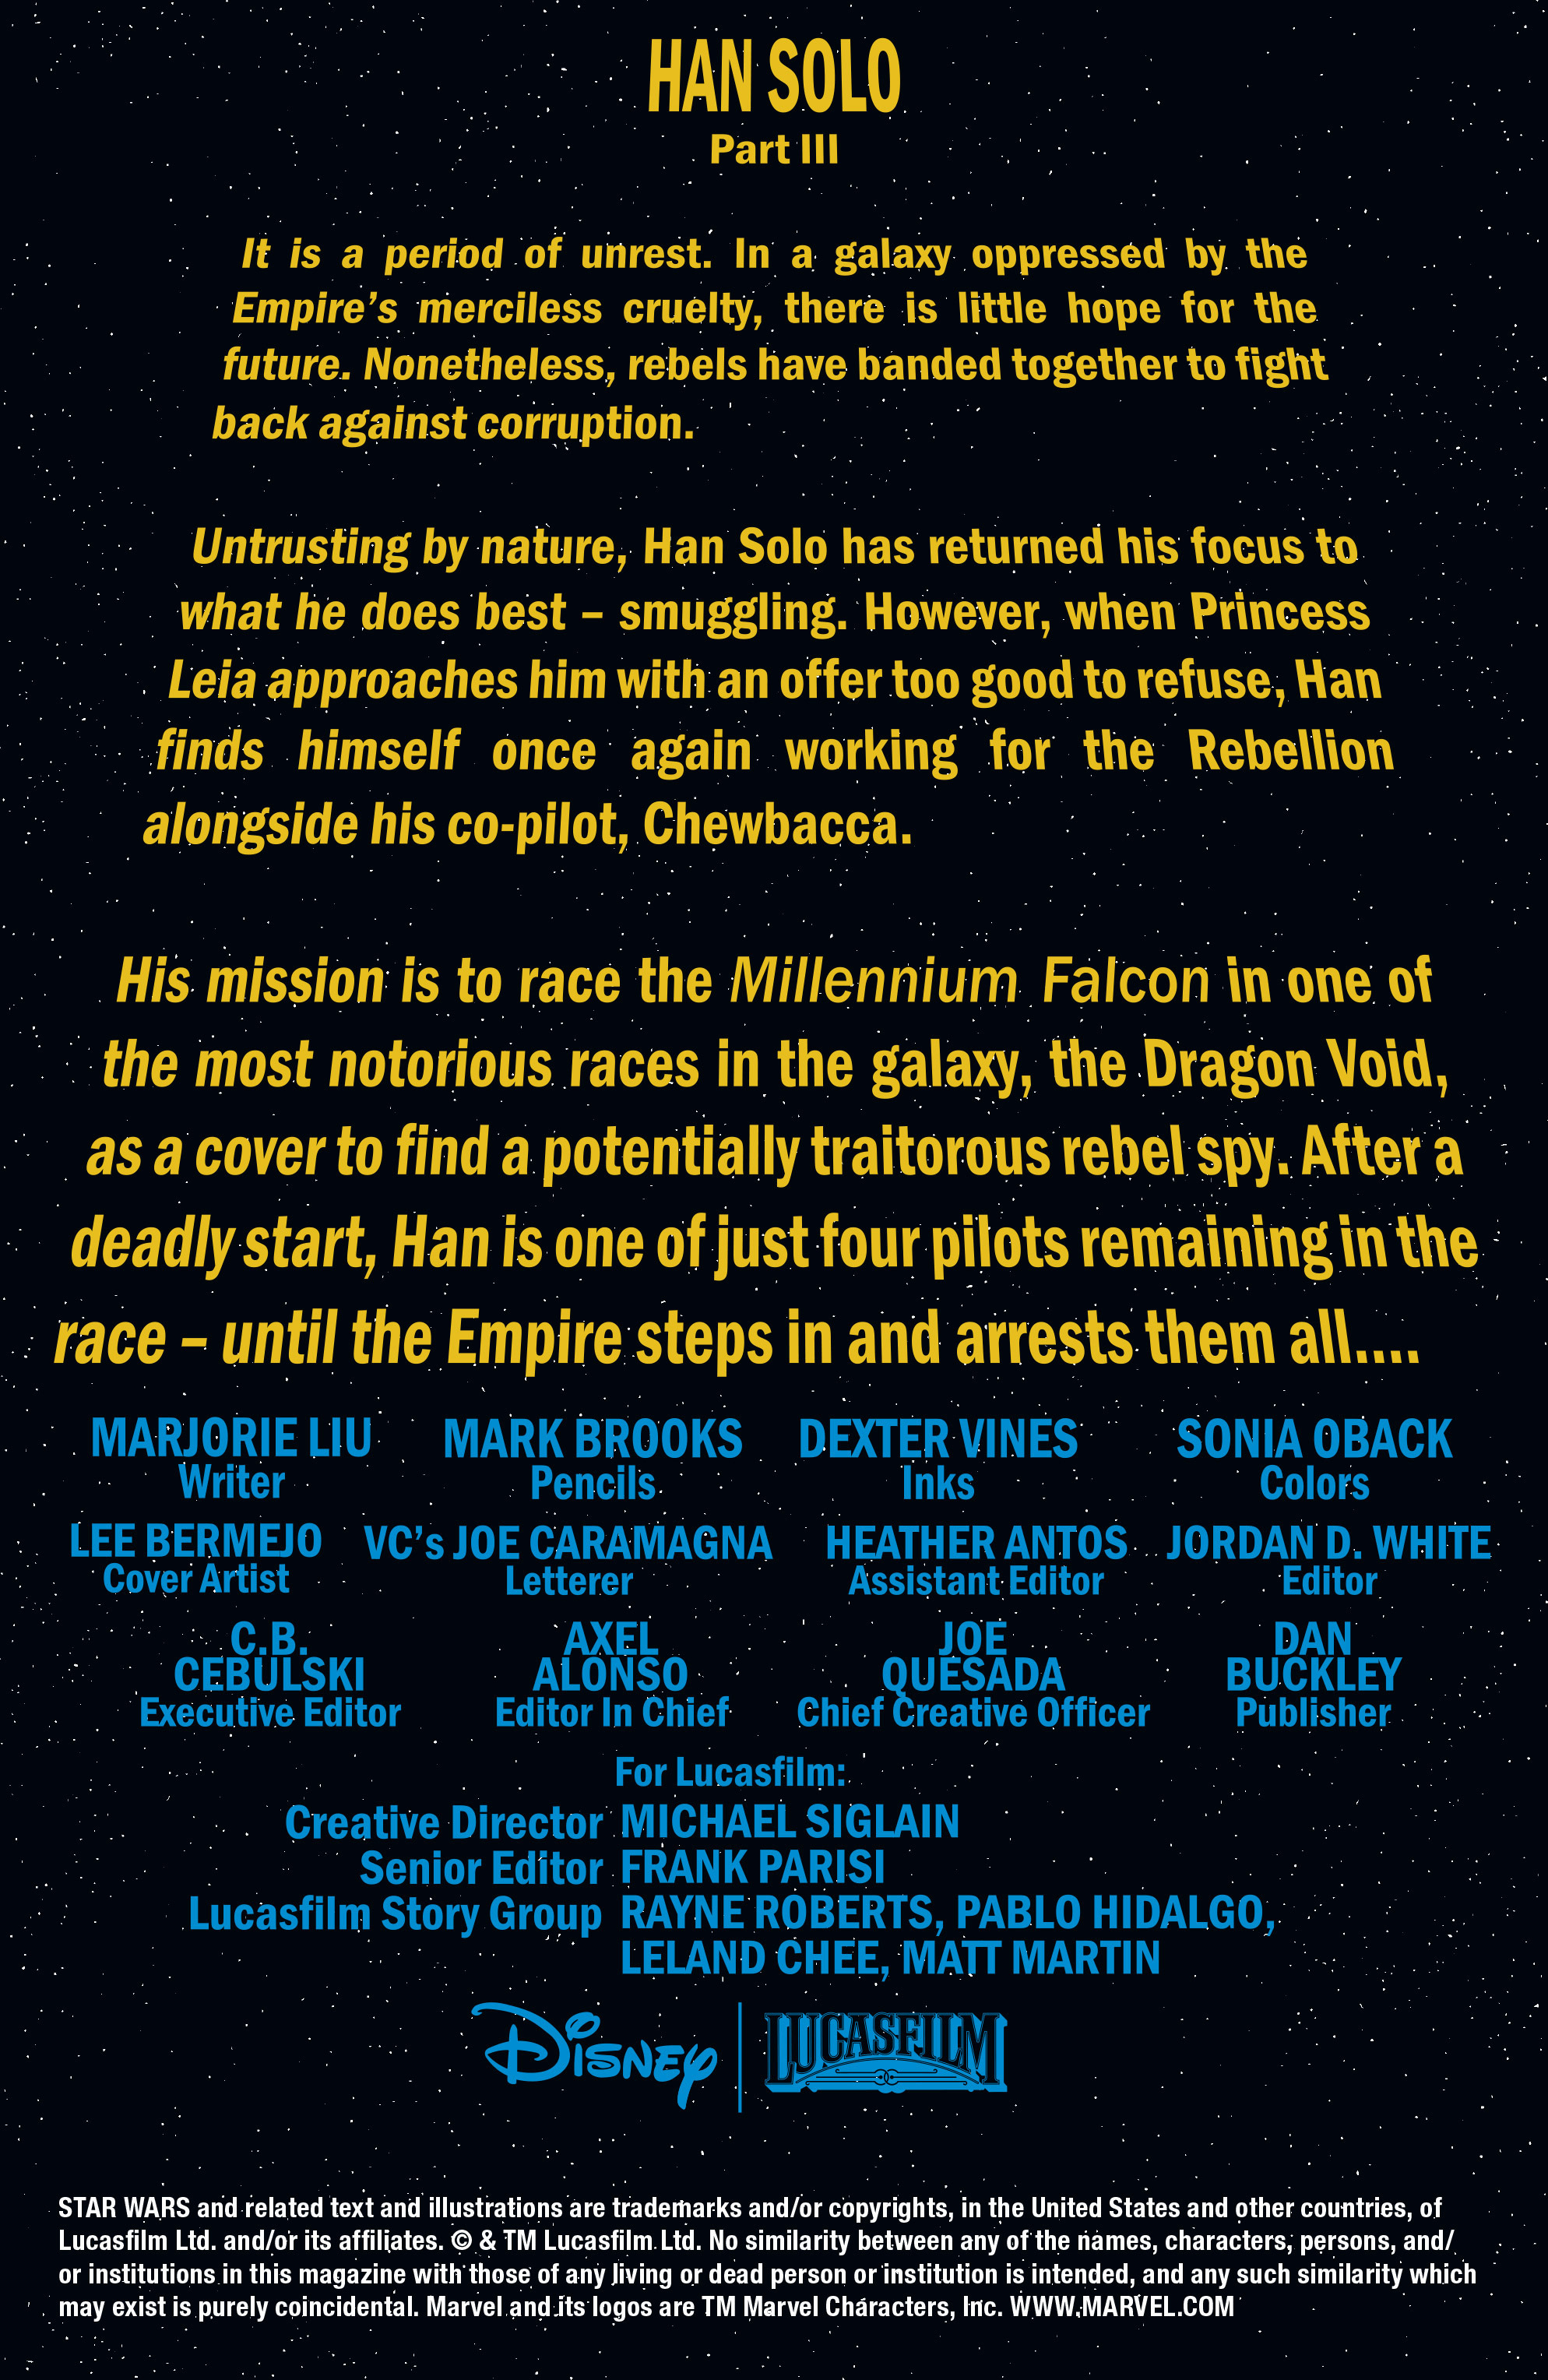 Read online Han Solo comic -  Issue #3 - 5